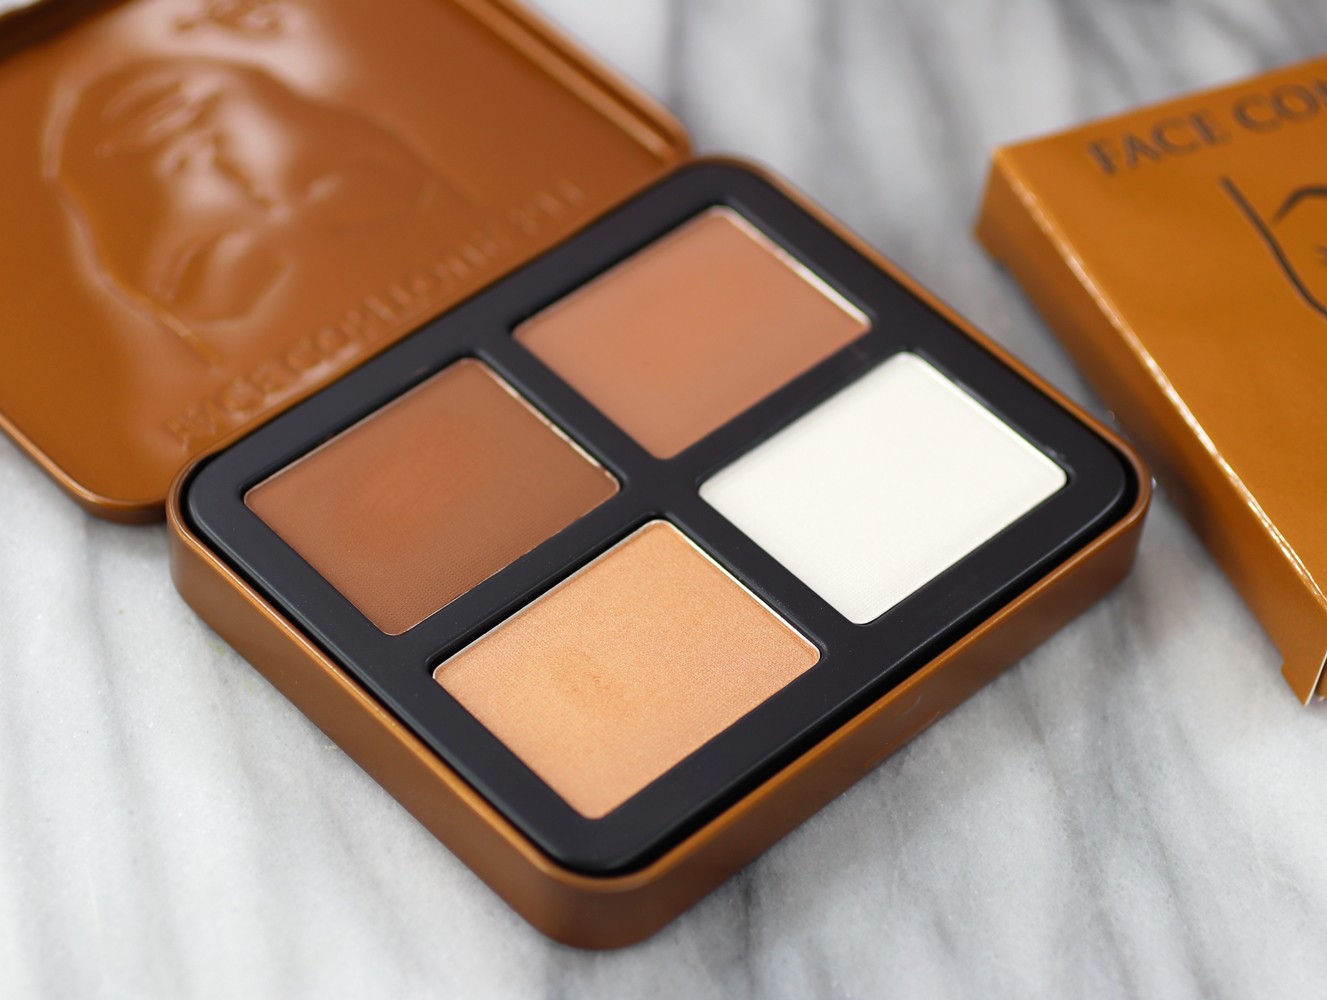 Luscious Cosmetics Face Contour Kit Review - Luscious Cosmetics Review and Try On by popular LA cruelty free beauty blogger My Beauty Bunny